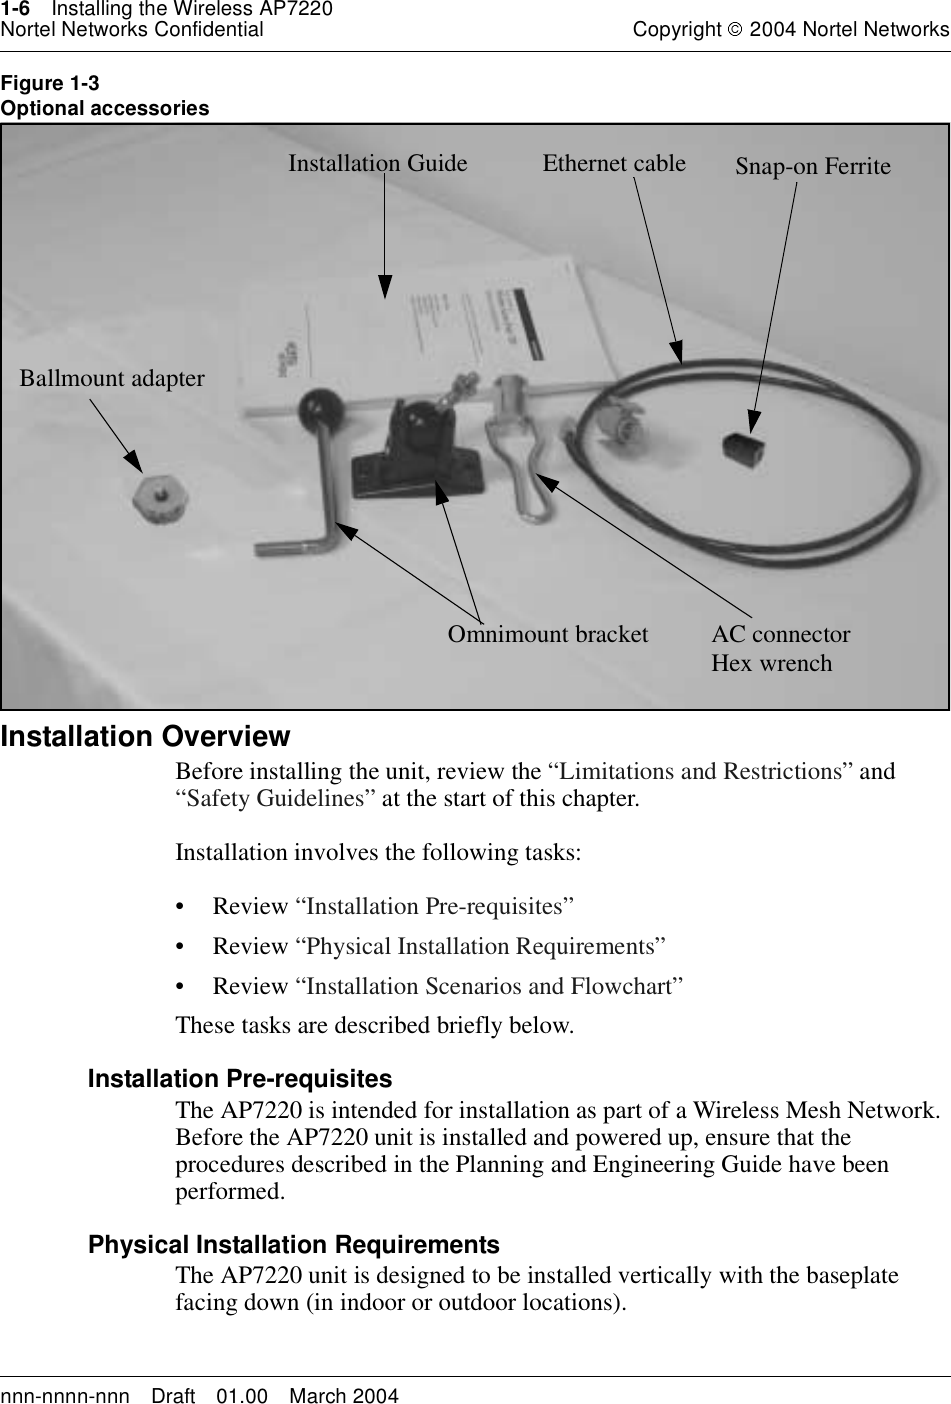 1-6 Installing the Wireless AP7220Nortel Networks Confidential Copyright 2004 Nortel Networksnnn-nnnn-nnn Draft 01.00 March 2004Figure 1-3Optional accessoriesInstallation Overview 1Before installing the unit, review the “Limitations and Restrictions” and“Safety Guidelines” at the start of this chapter.Installation involves the following tasks:•Review“Installation Pre-requisites”•Review“Physical Installation Requirements”•Review“Installation Scenarios and Flowchart”These tasks are described briefly below.Installation Pre-requisitesThe AP7220 is intended for installation as part of a Wireless Mesh Network.Before the AP7220 unit is installed and powered up, ensure that theprocedures described in the Planning and Engineering Guide have beenperformed.Physical Installation RequirementsThe AP7220 unit is designed to be installed vertically with the baseplatefacing down (in indoor or outdoor locations).Installation Guide Ethernet cableBallmount adapterOmnimount bracket AC connectorHex wrenchSnap-on Ferrite